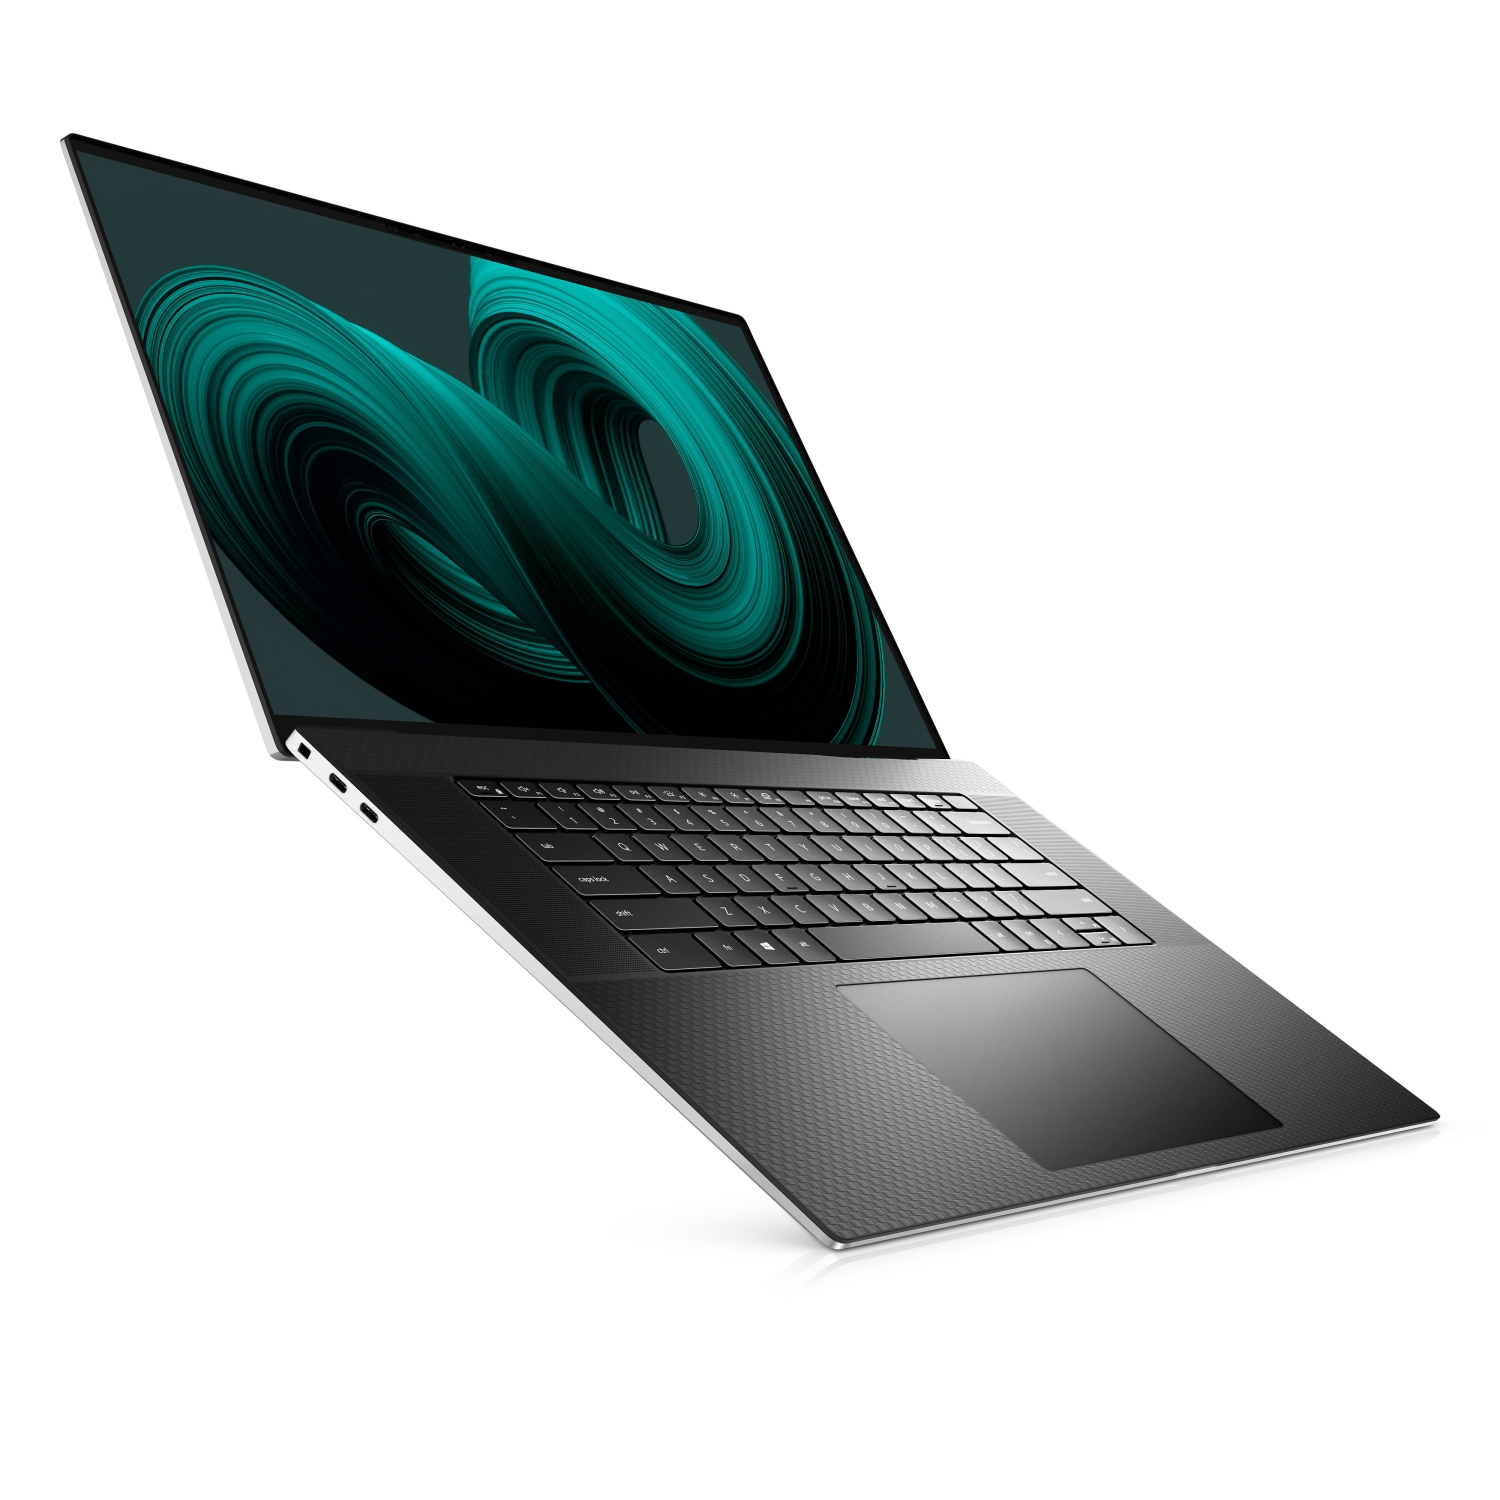 Refurbished (Excellent) – Dell XPS 9710 Laptop (2021) | 17" 4K Touch | Core i7 - 512GB SSD - 32GB RAM - RTX 3050 | 8 Cores @ 4.6 GHz - 11th Gen CPU